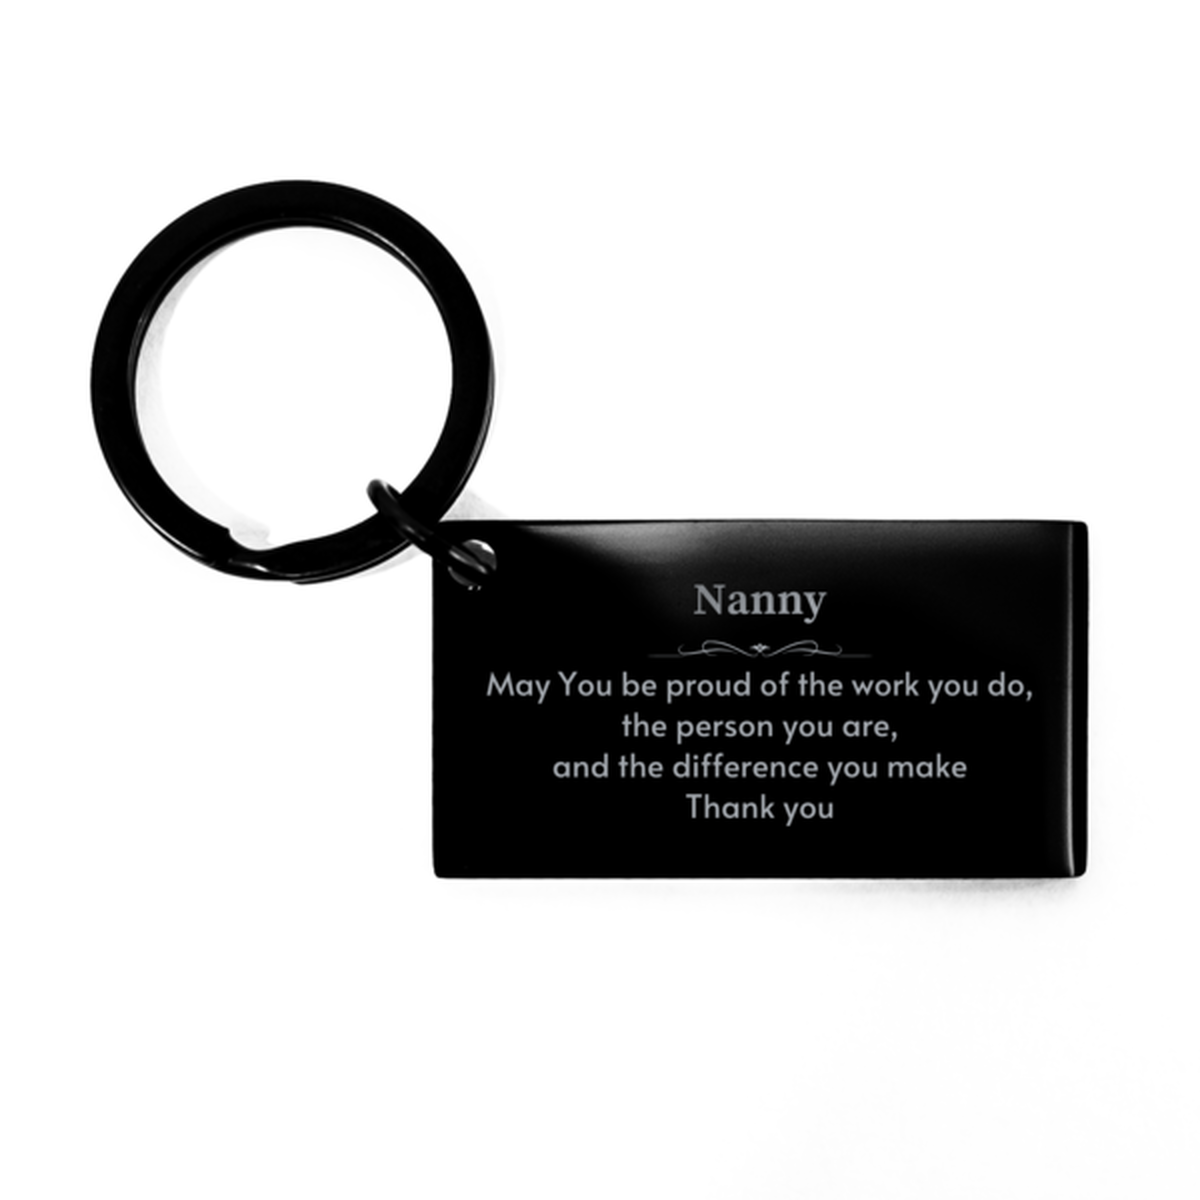 Heartwarming Keychain Retirement Coworkers Gifts for Nanny, Parole Officer May You be proud of the work you do, the person you are Gifts for Boss Men Women Friends